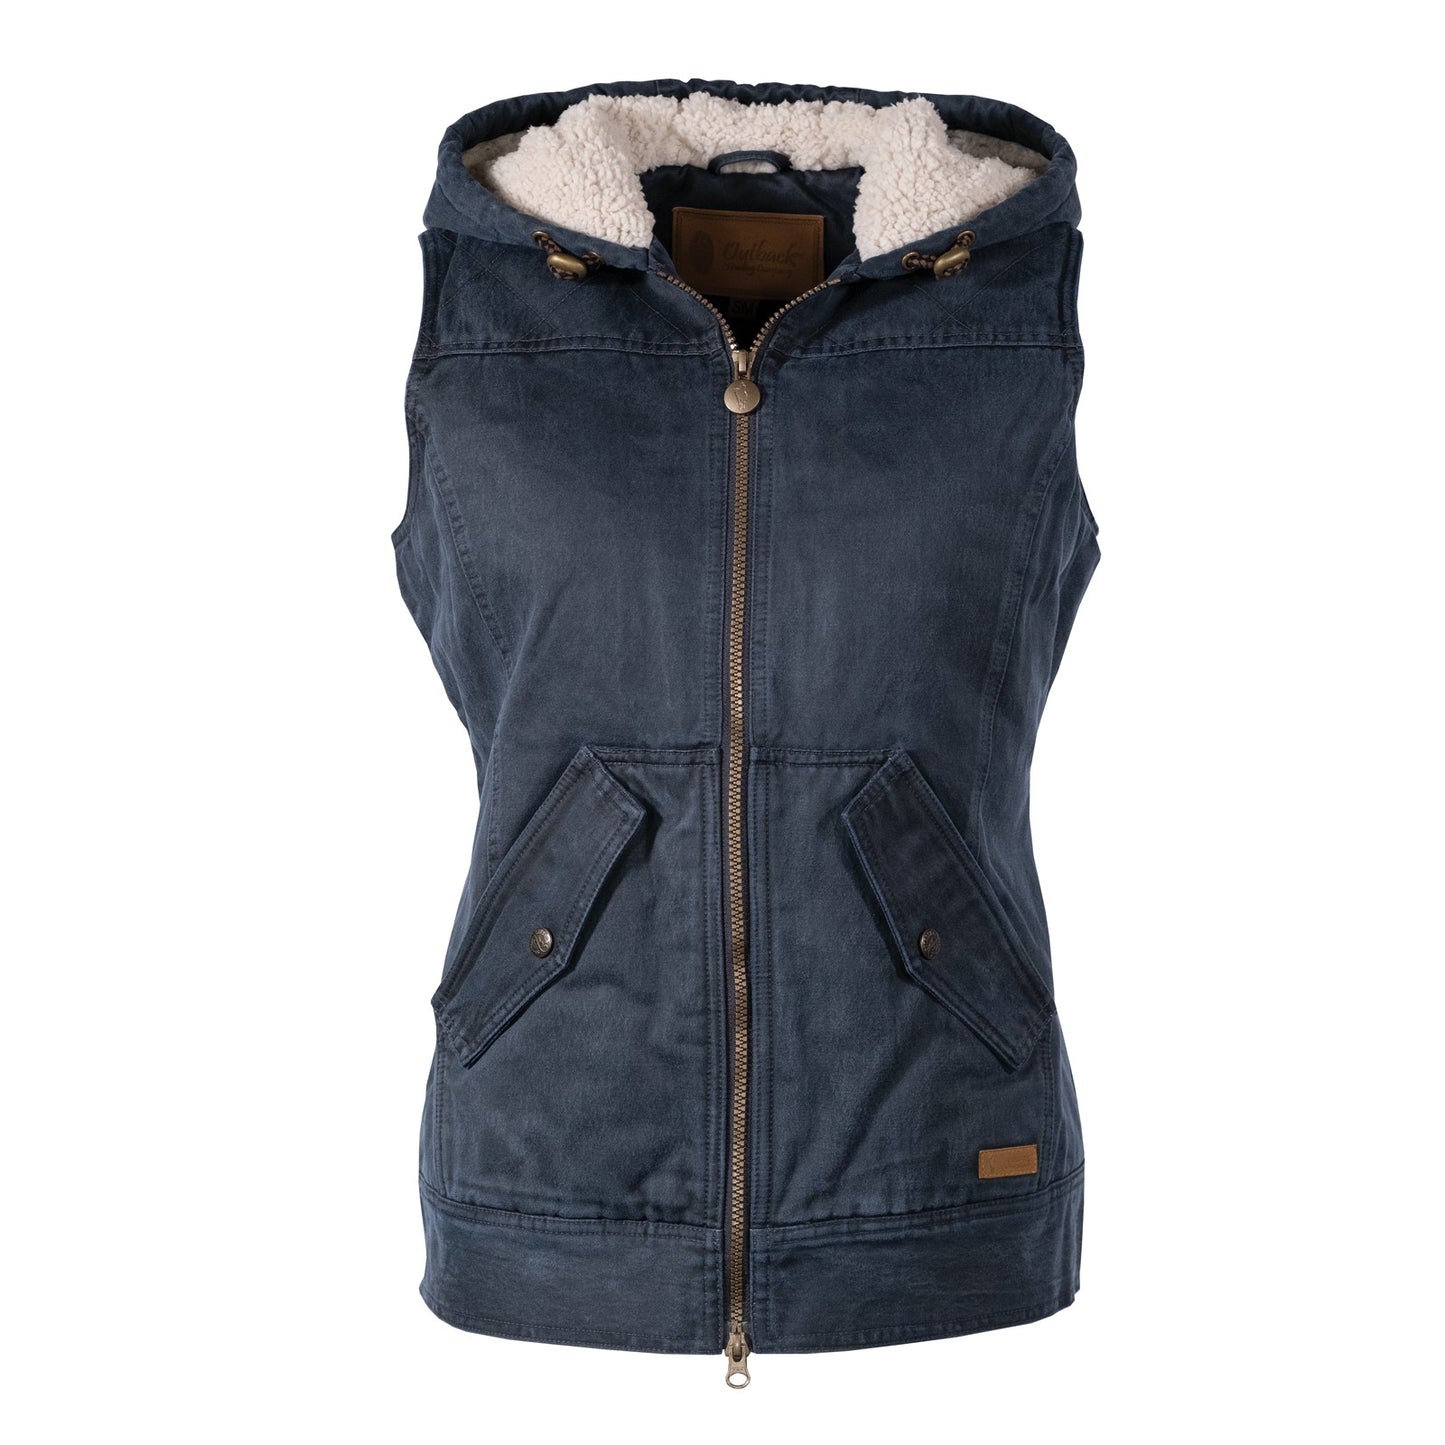 Outback Trading Company Ladies Heidi Navy Vest 29678-NVY